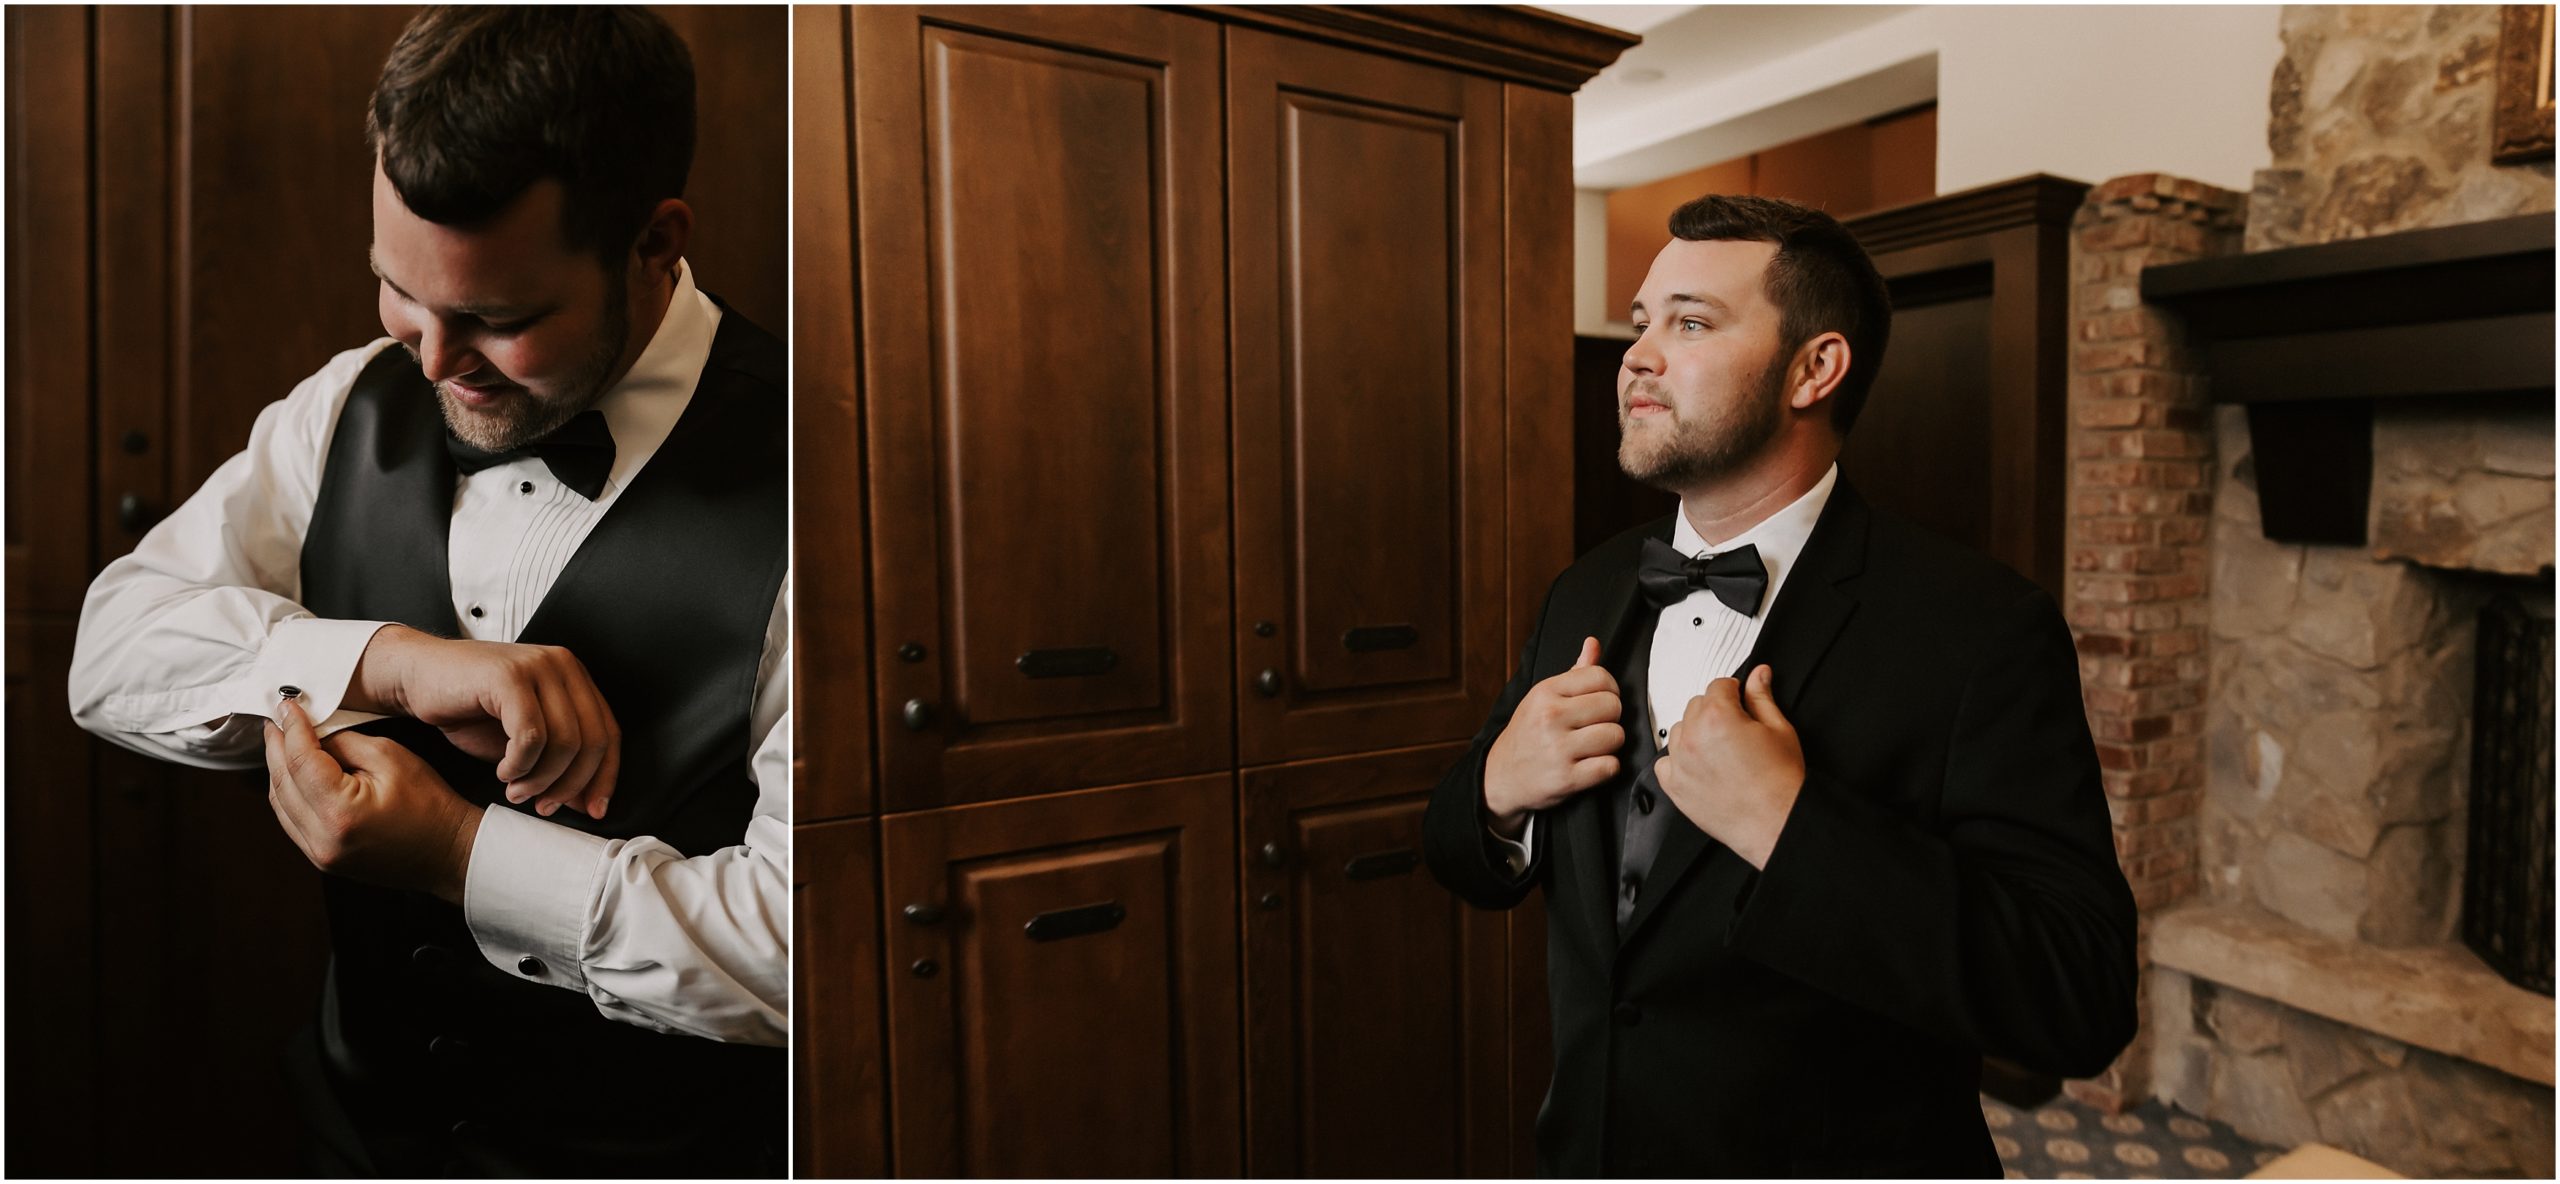 The style of the couple for their elegant and timeless wedding was inspired by classic looks that would stand the tests of time.
Adam chose a classic and elegant black suit with black waistcoat and a bow which fit perfectly his white shirt with cufflinks and black buttons.
